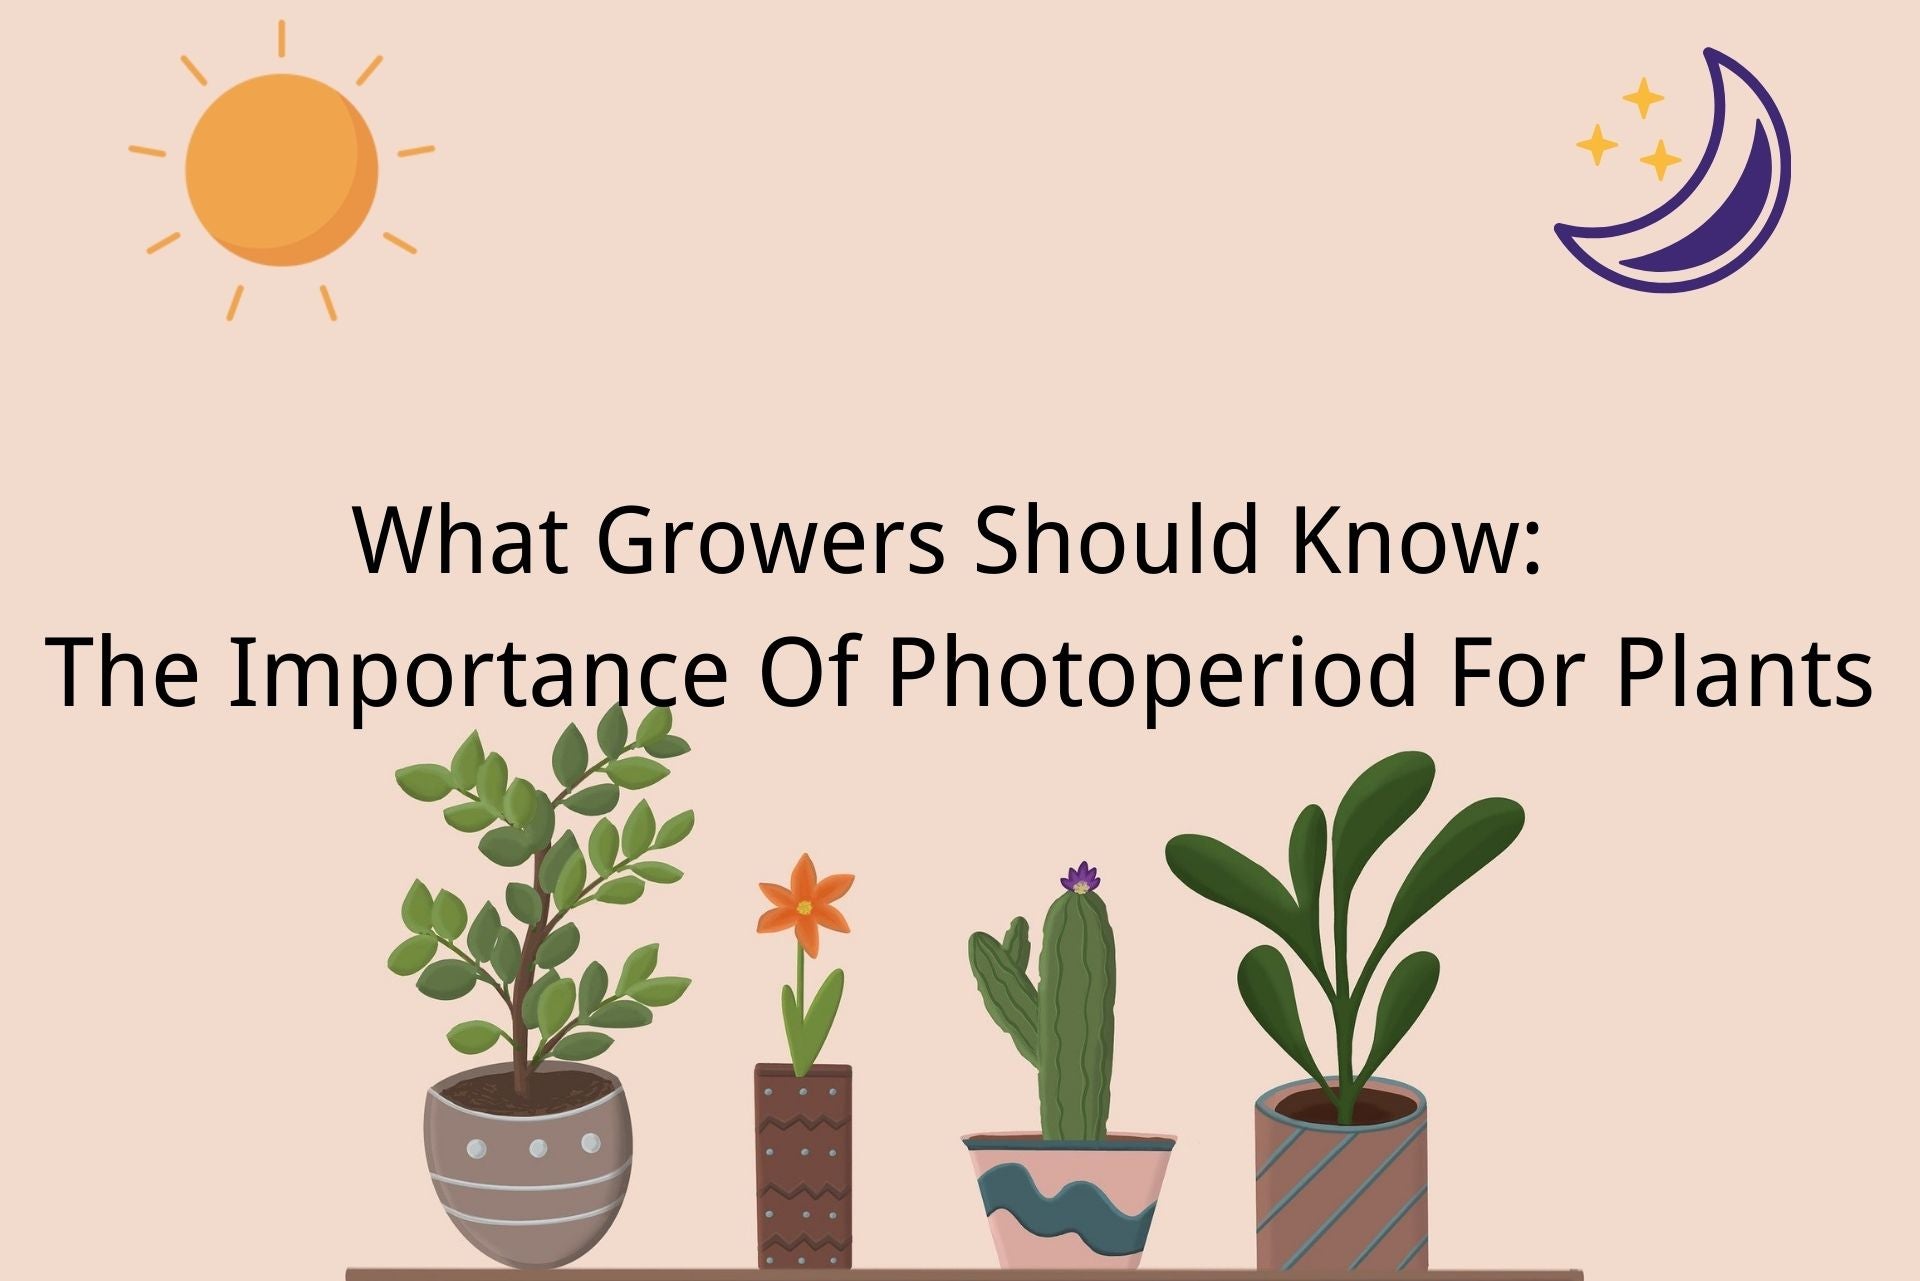 The Importance Of Photoperiod For Plants